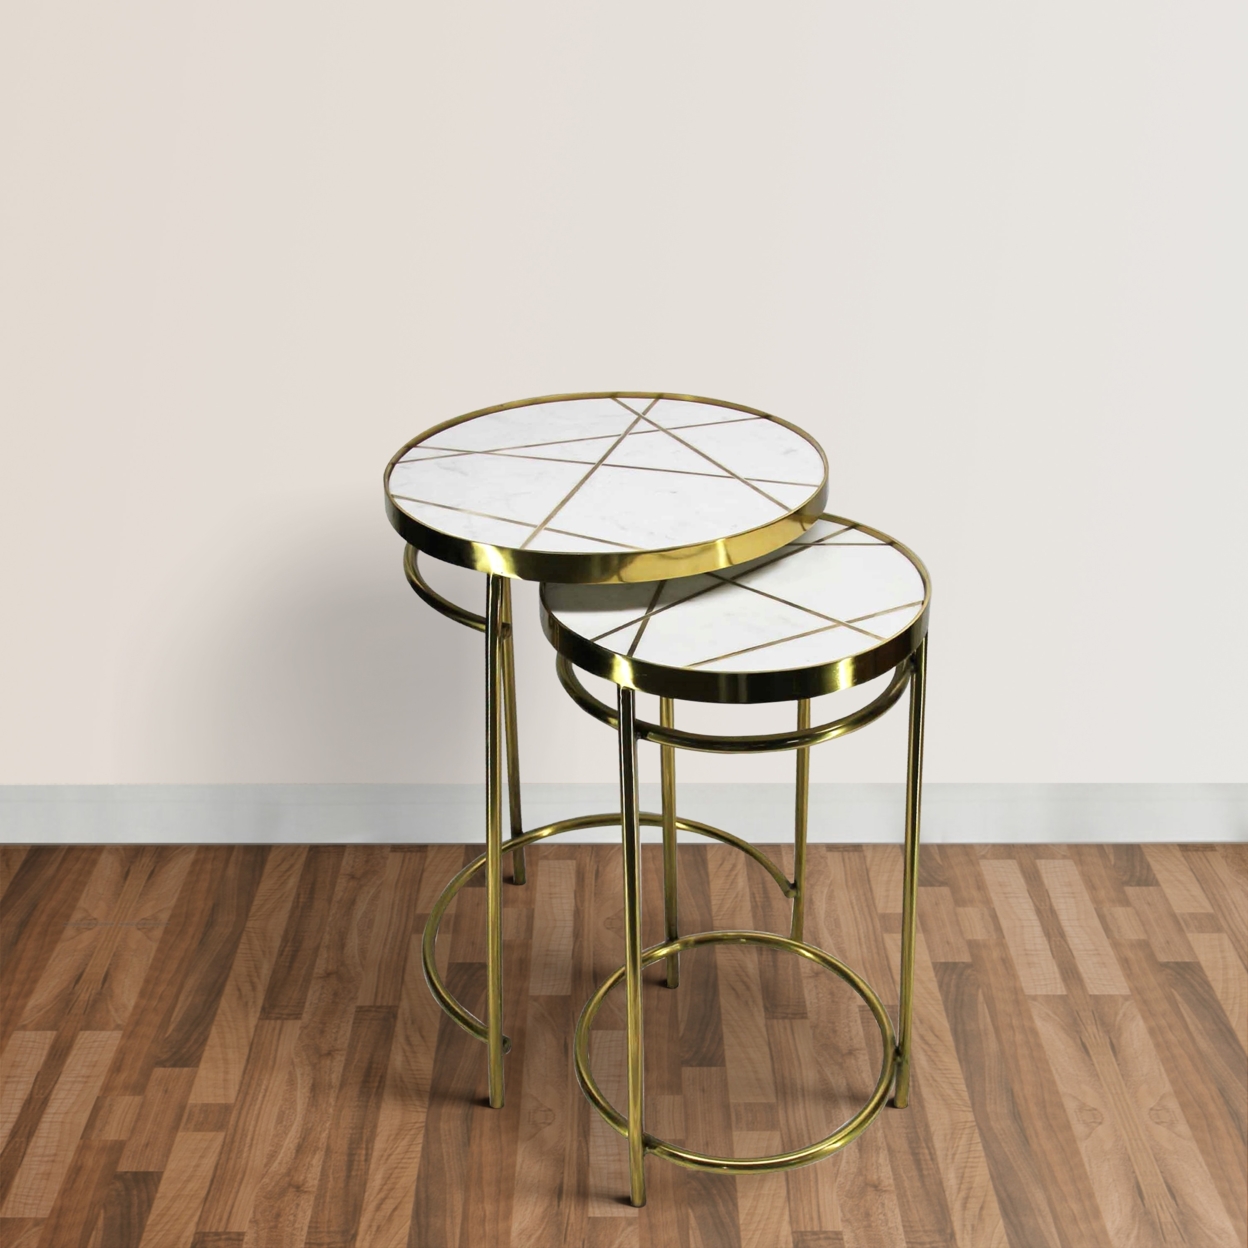 22, 20 Inch Round 2 Piece Marble Top Nesting End Table Set With Metal Frame, Brass Inlay, White- Saltoro Sherpi